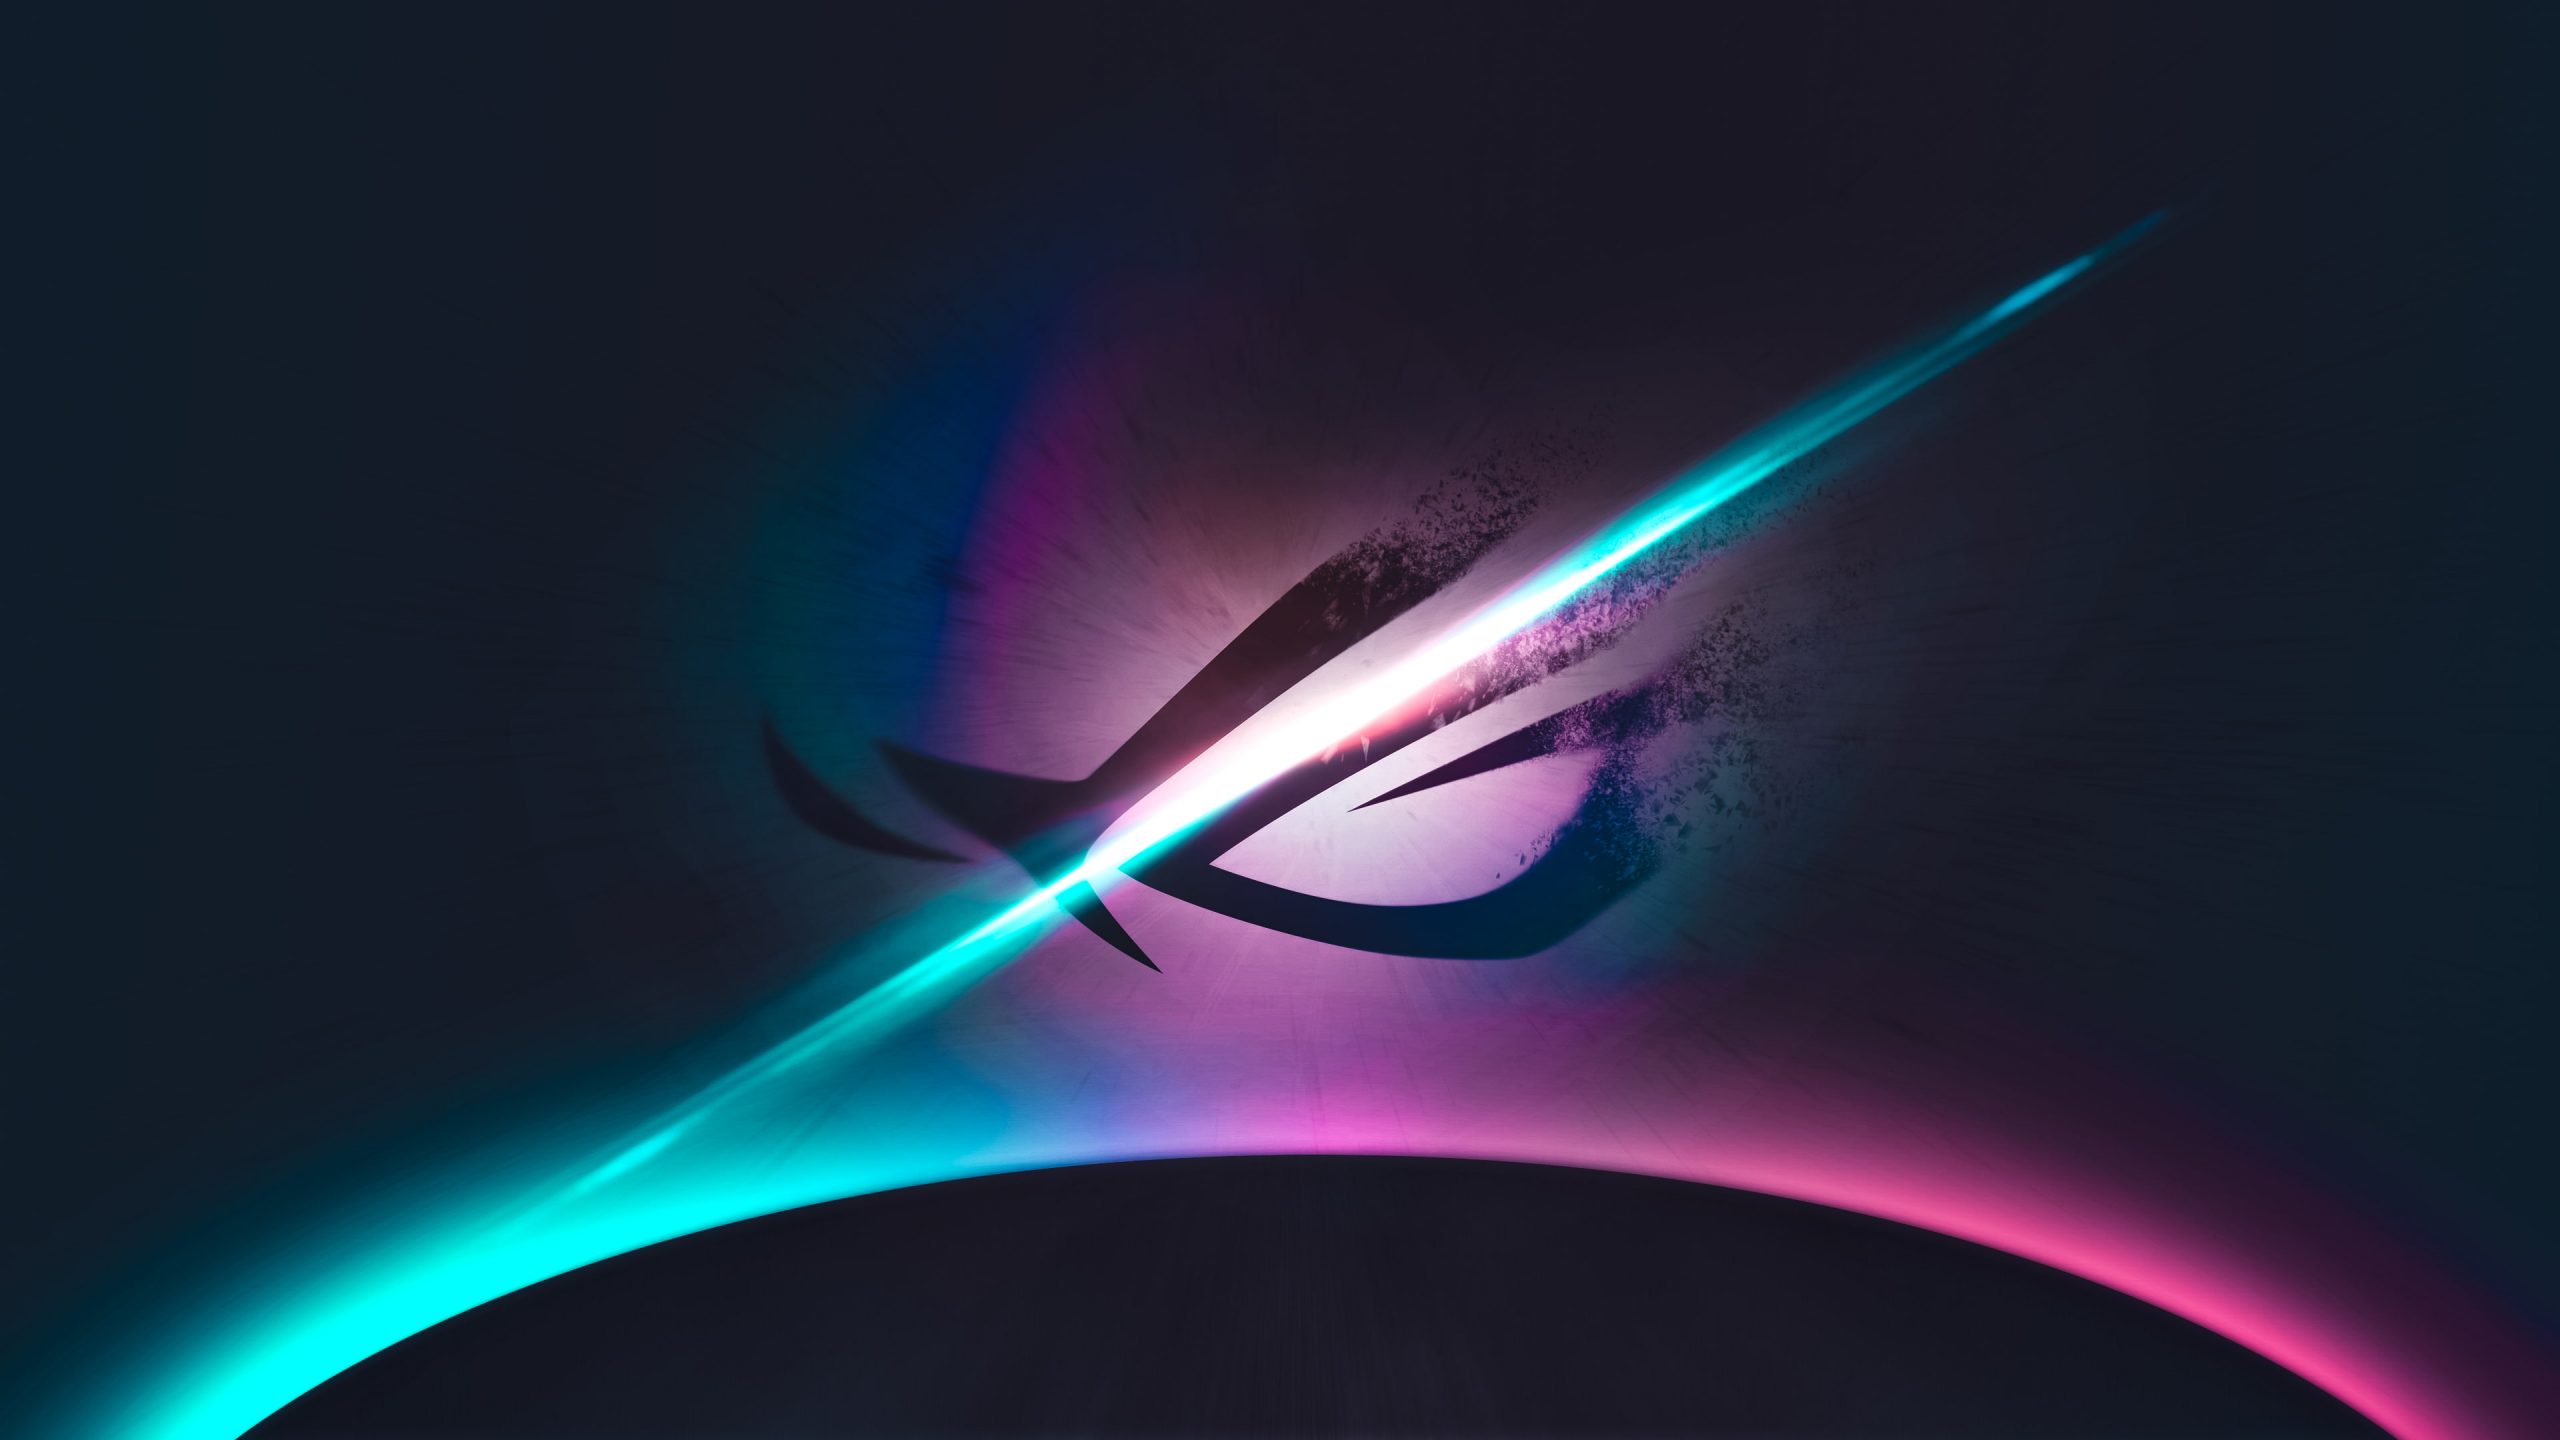 Asus Rog Republic Of Gamers 4k Wallpaper For You Hd Wallpaper For Desktop Mobile Ultrawide wallpapers are exclusive for registered users. asus rog republic of gamers 4k